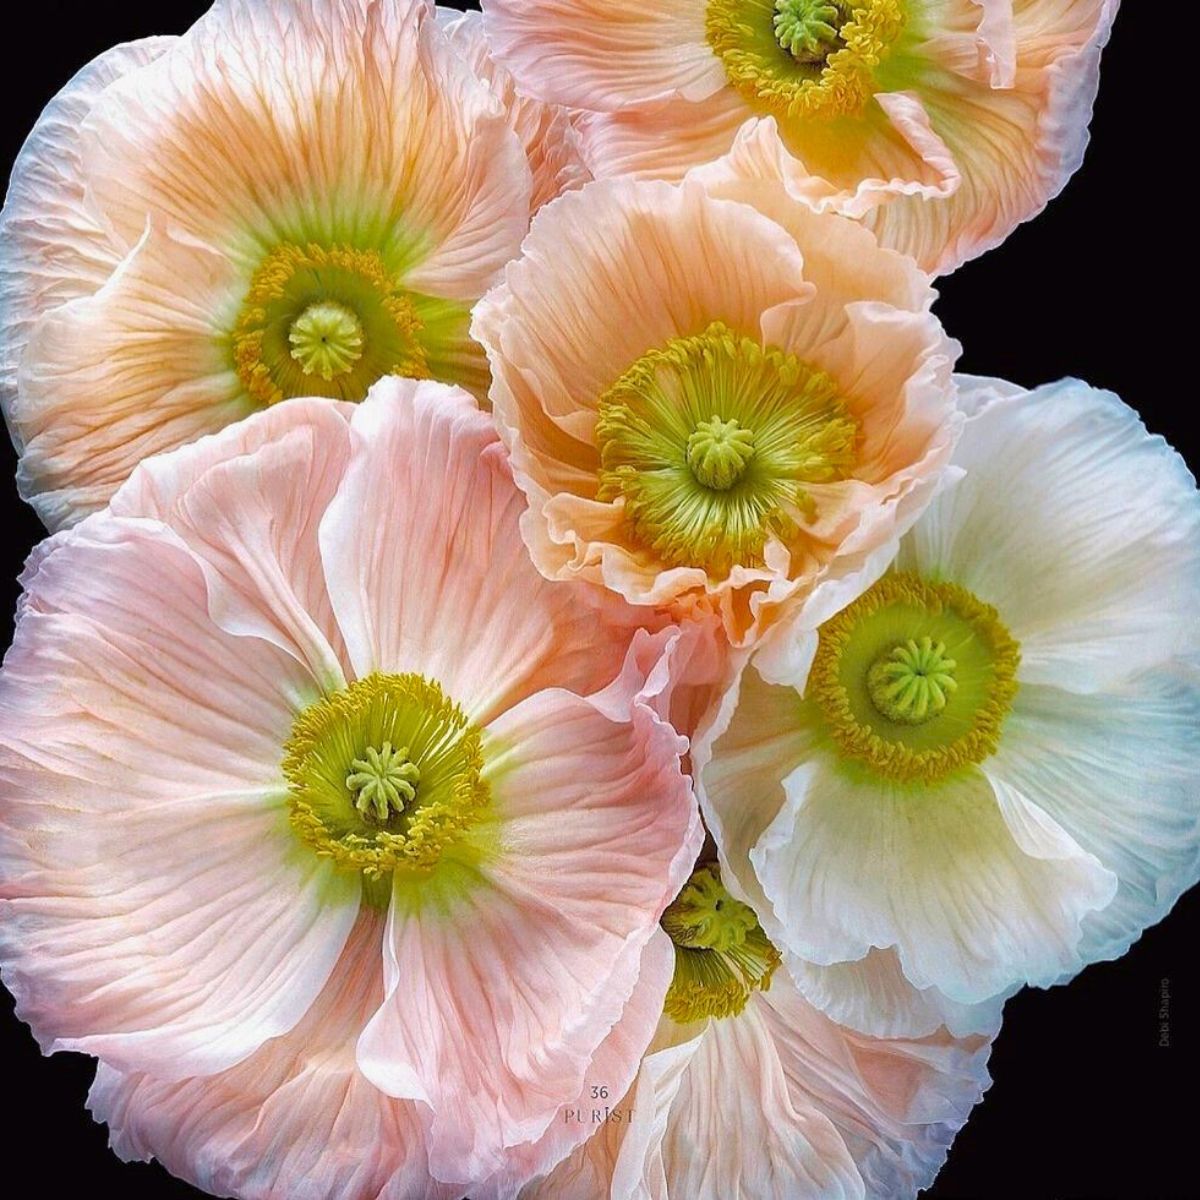 Pastel colored poppies seen in Beauty in Bloom book